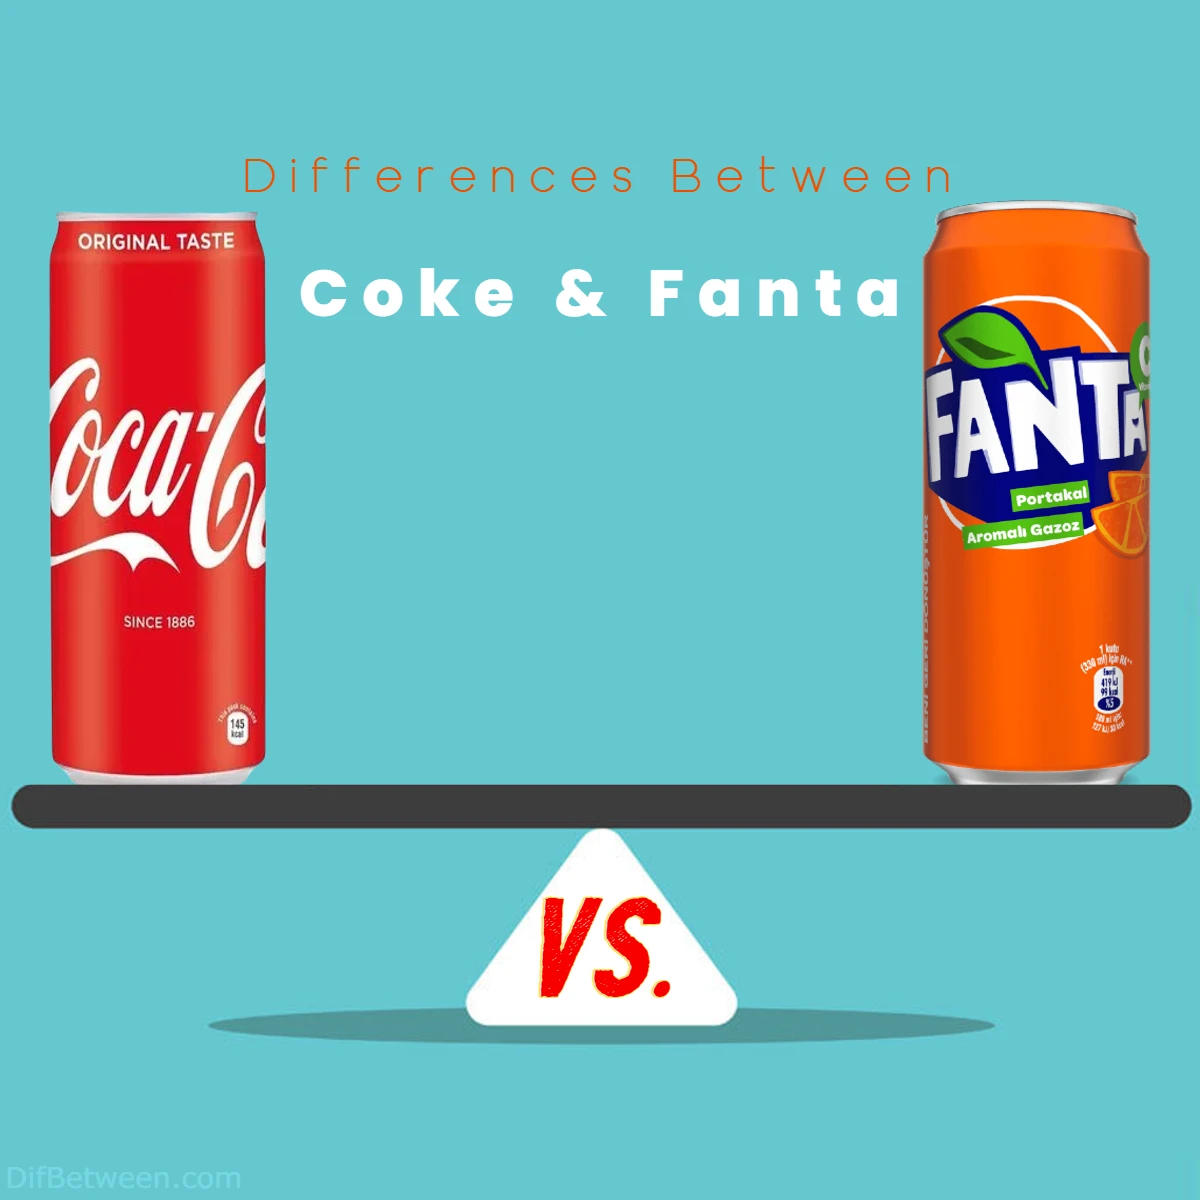 Differences Between Fanta and Coke